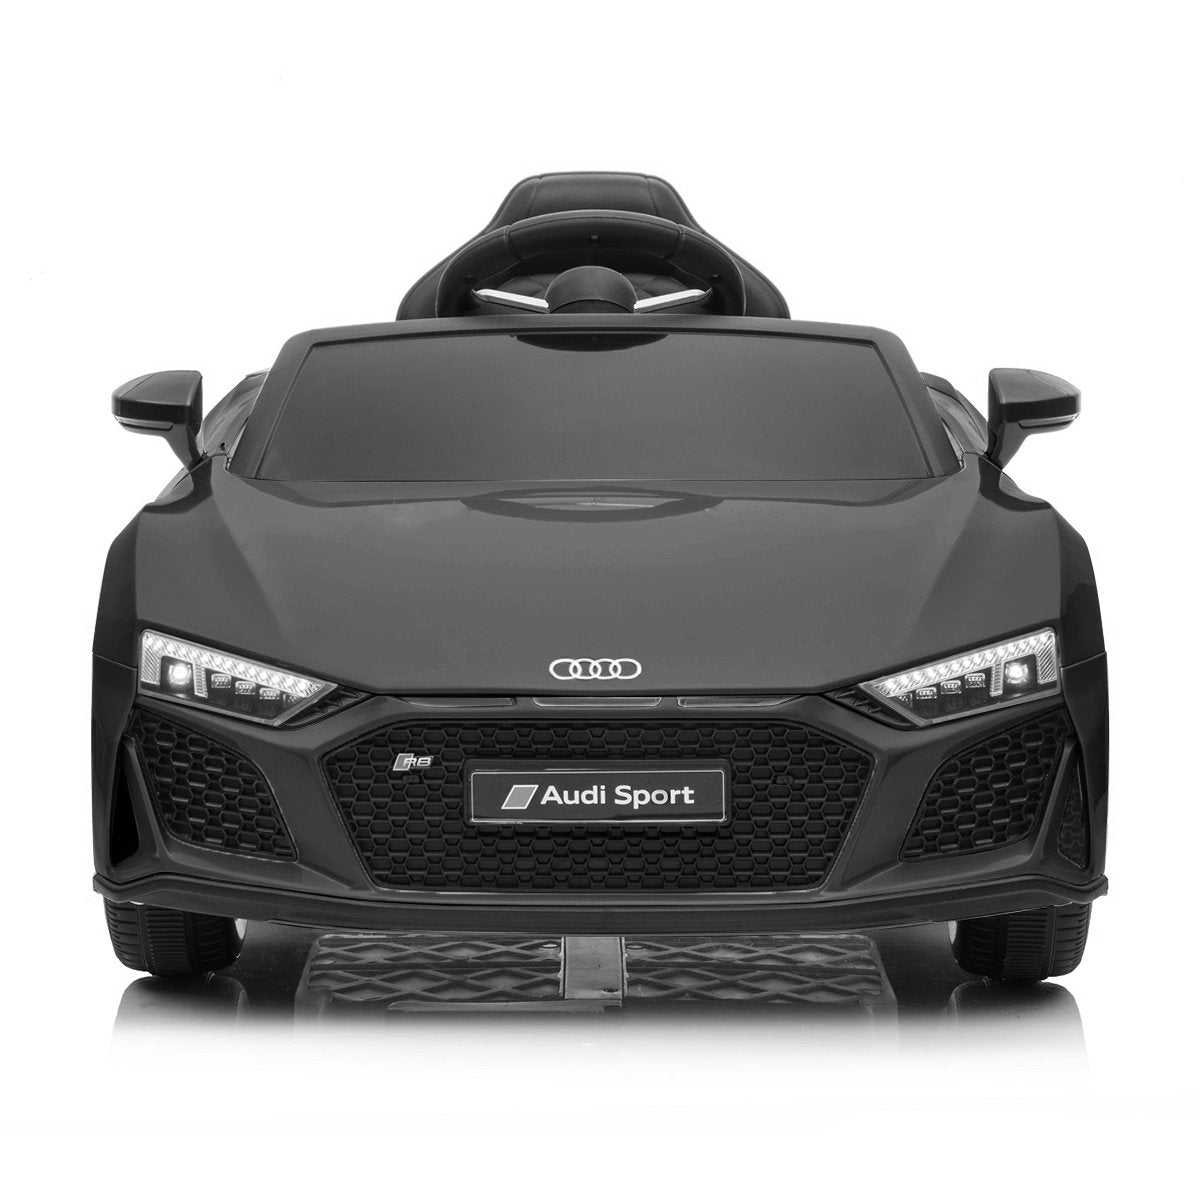 outdoor toys Audi Sport Licensed Kids Electric Ride On Car Remote Control Black